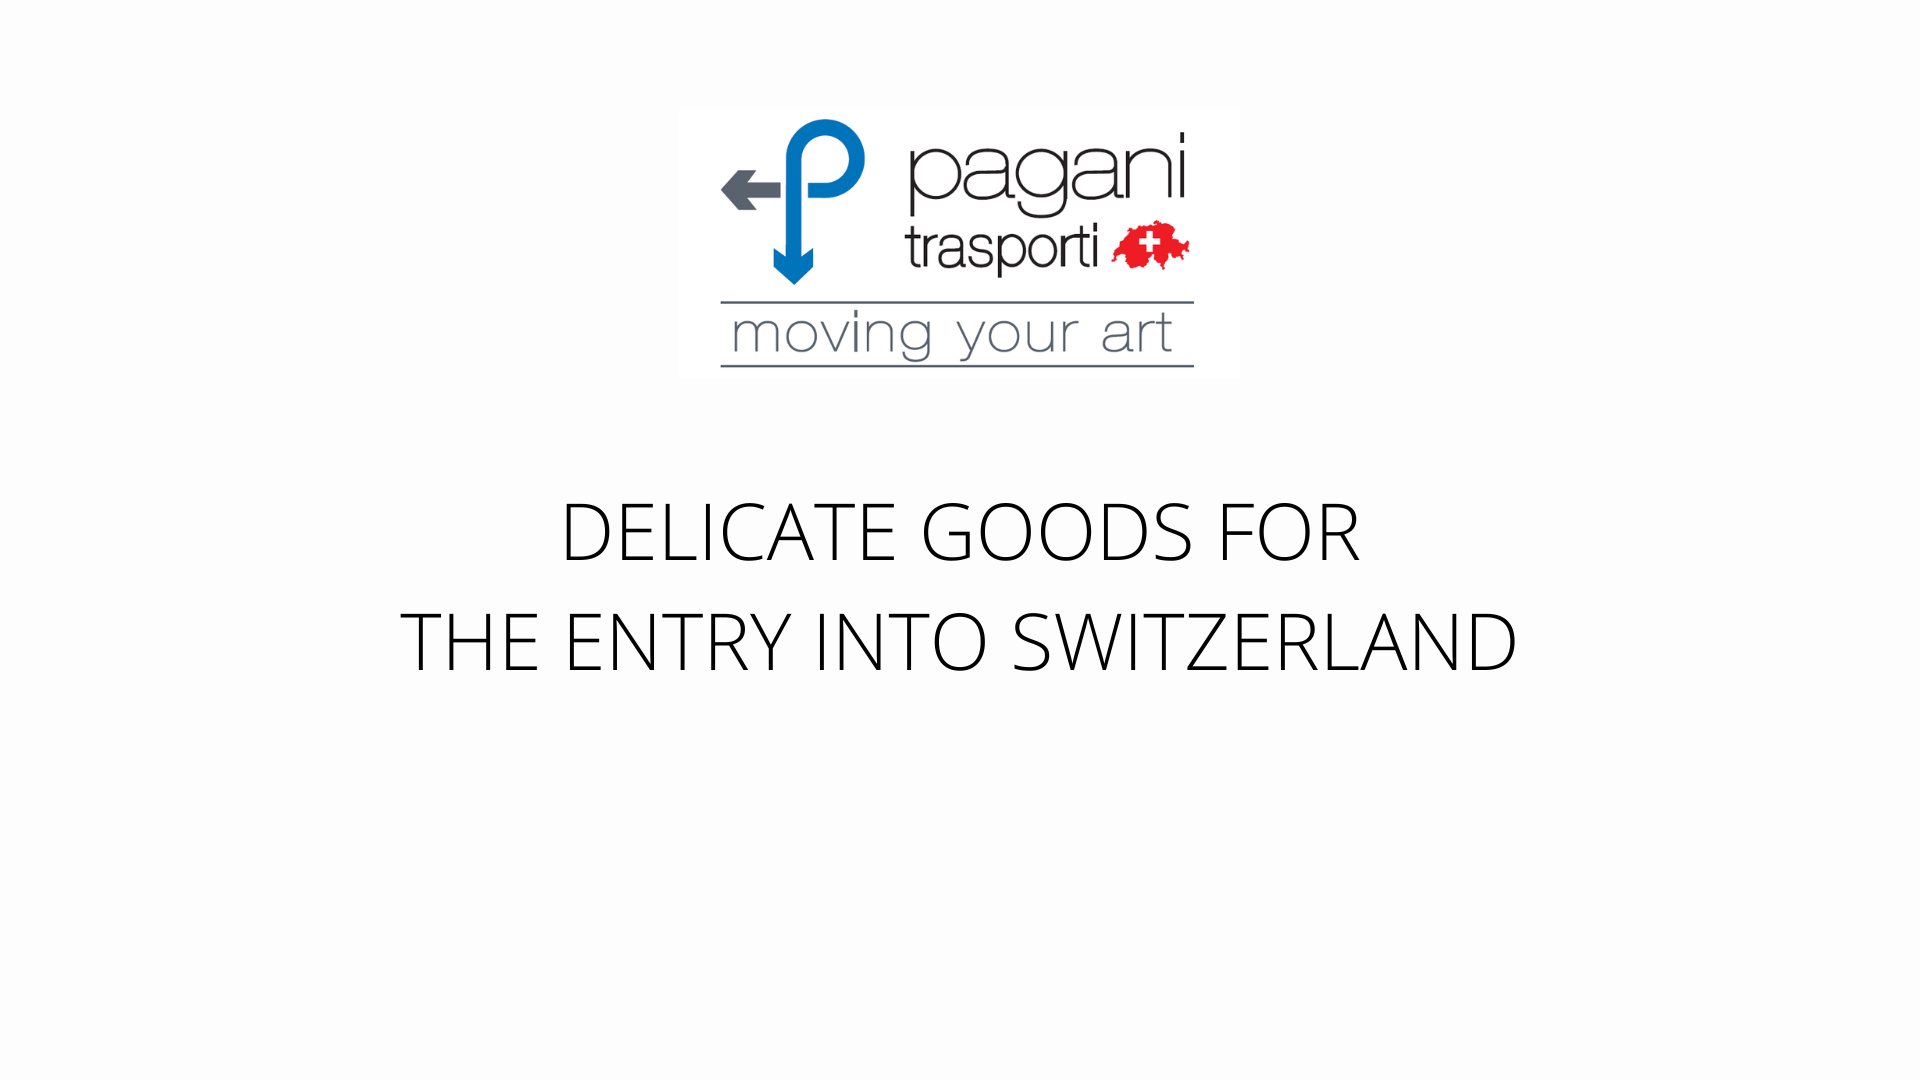 DELICATE GOODS FOR THE ENTRY INTO SWITZERLAND